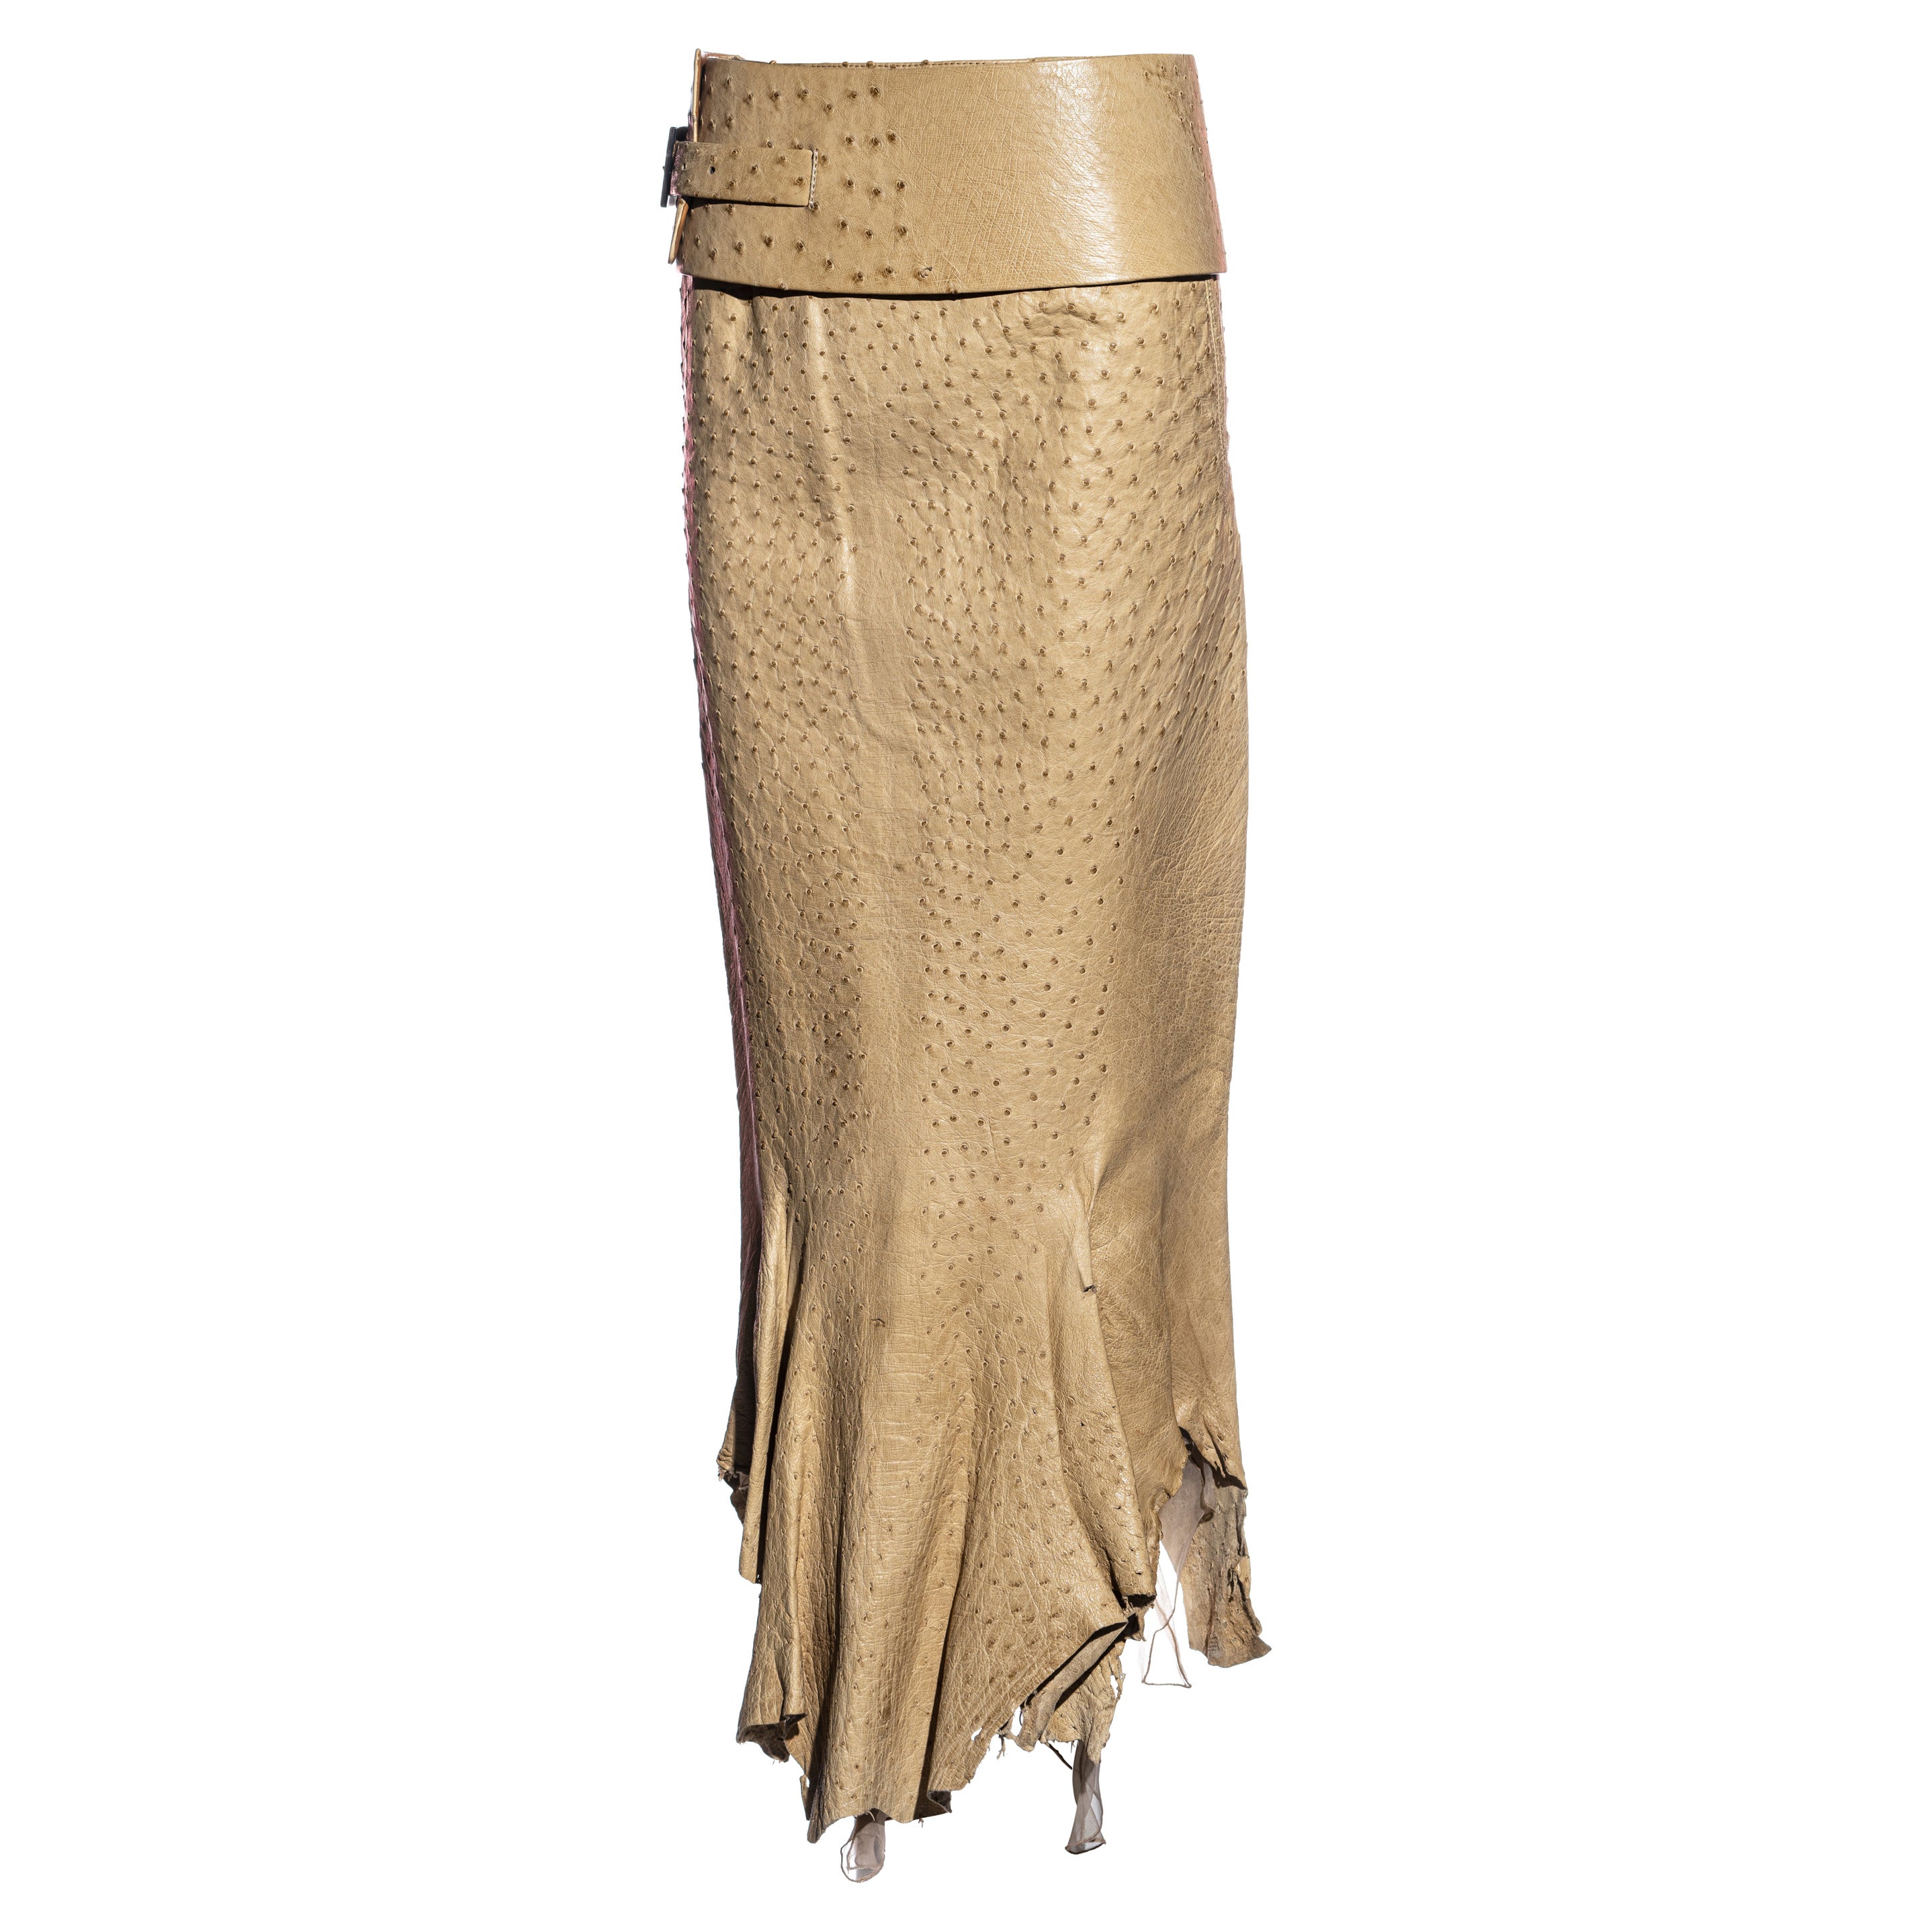 Gianfranco Ferre beige ostrich leather skirt and belt, ss 2000